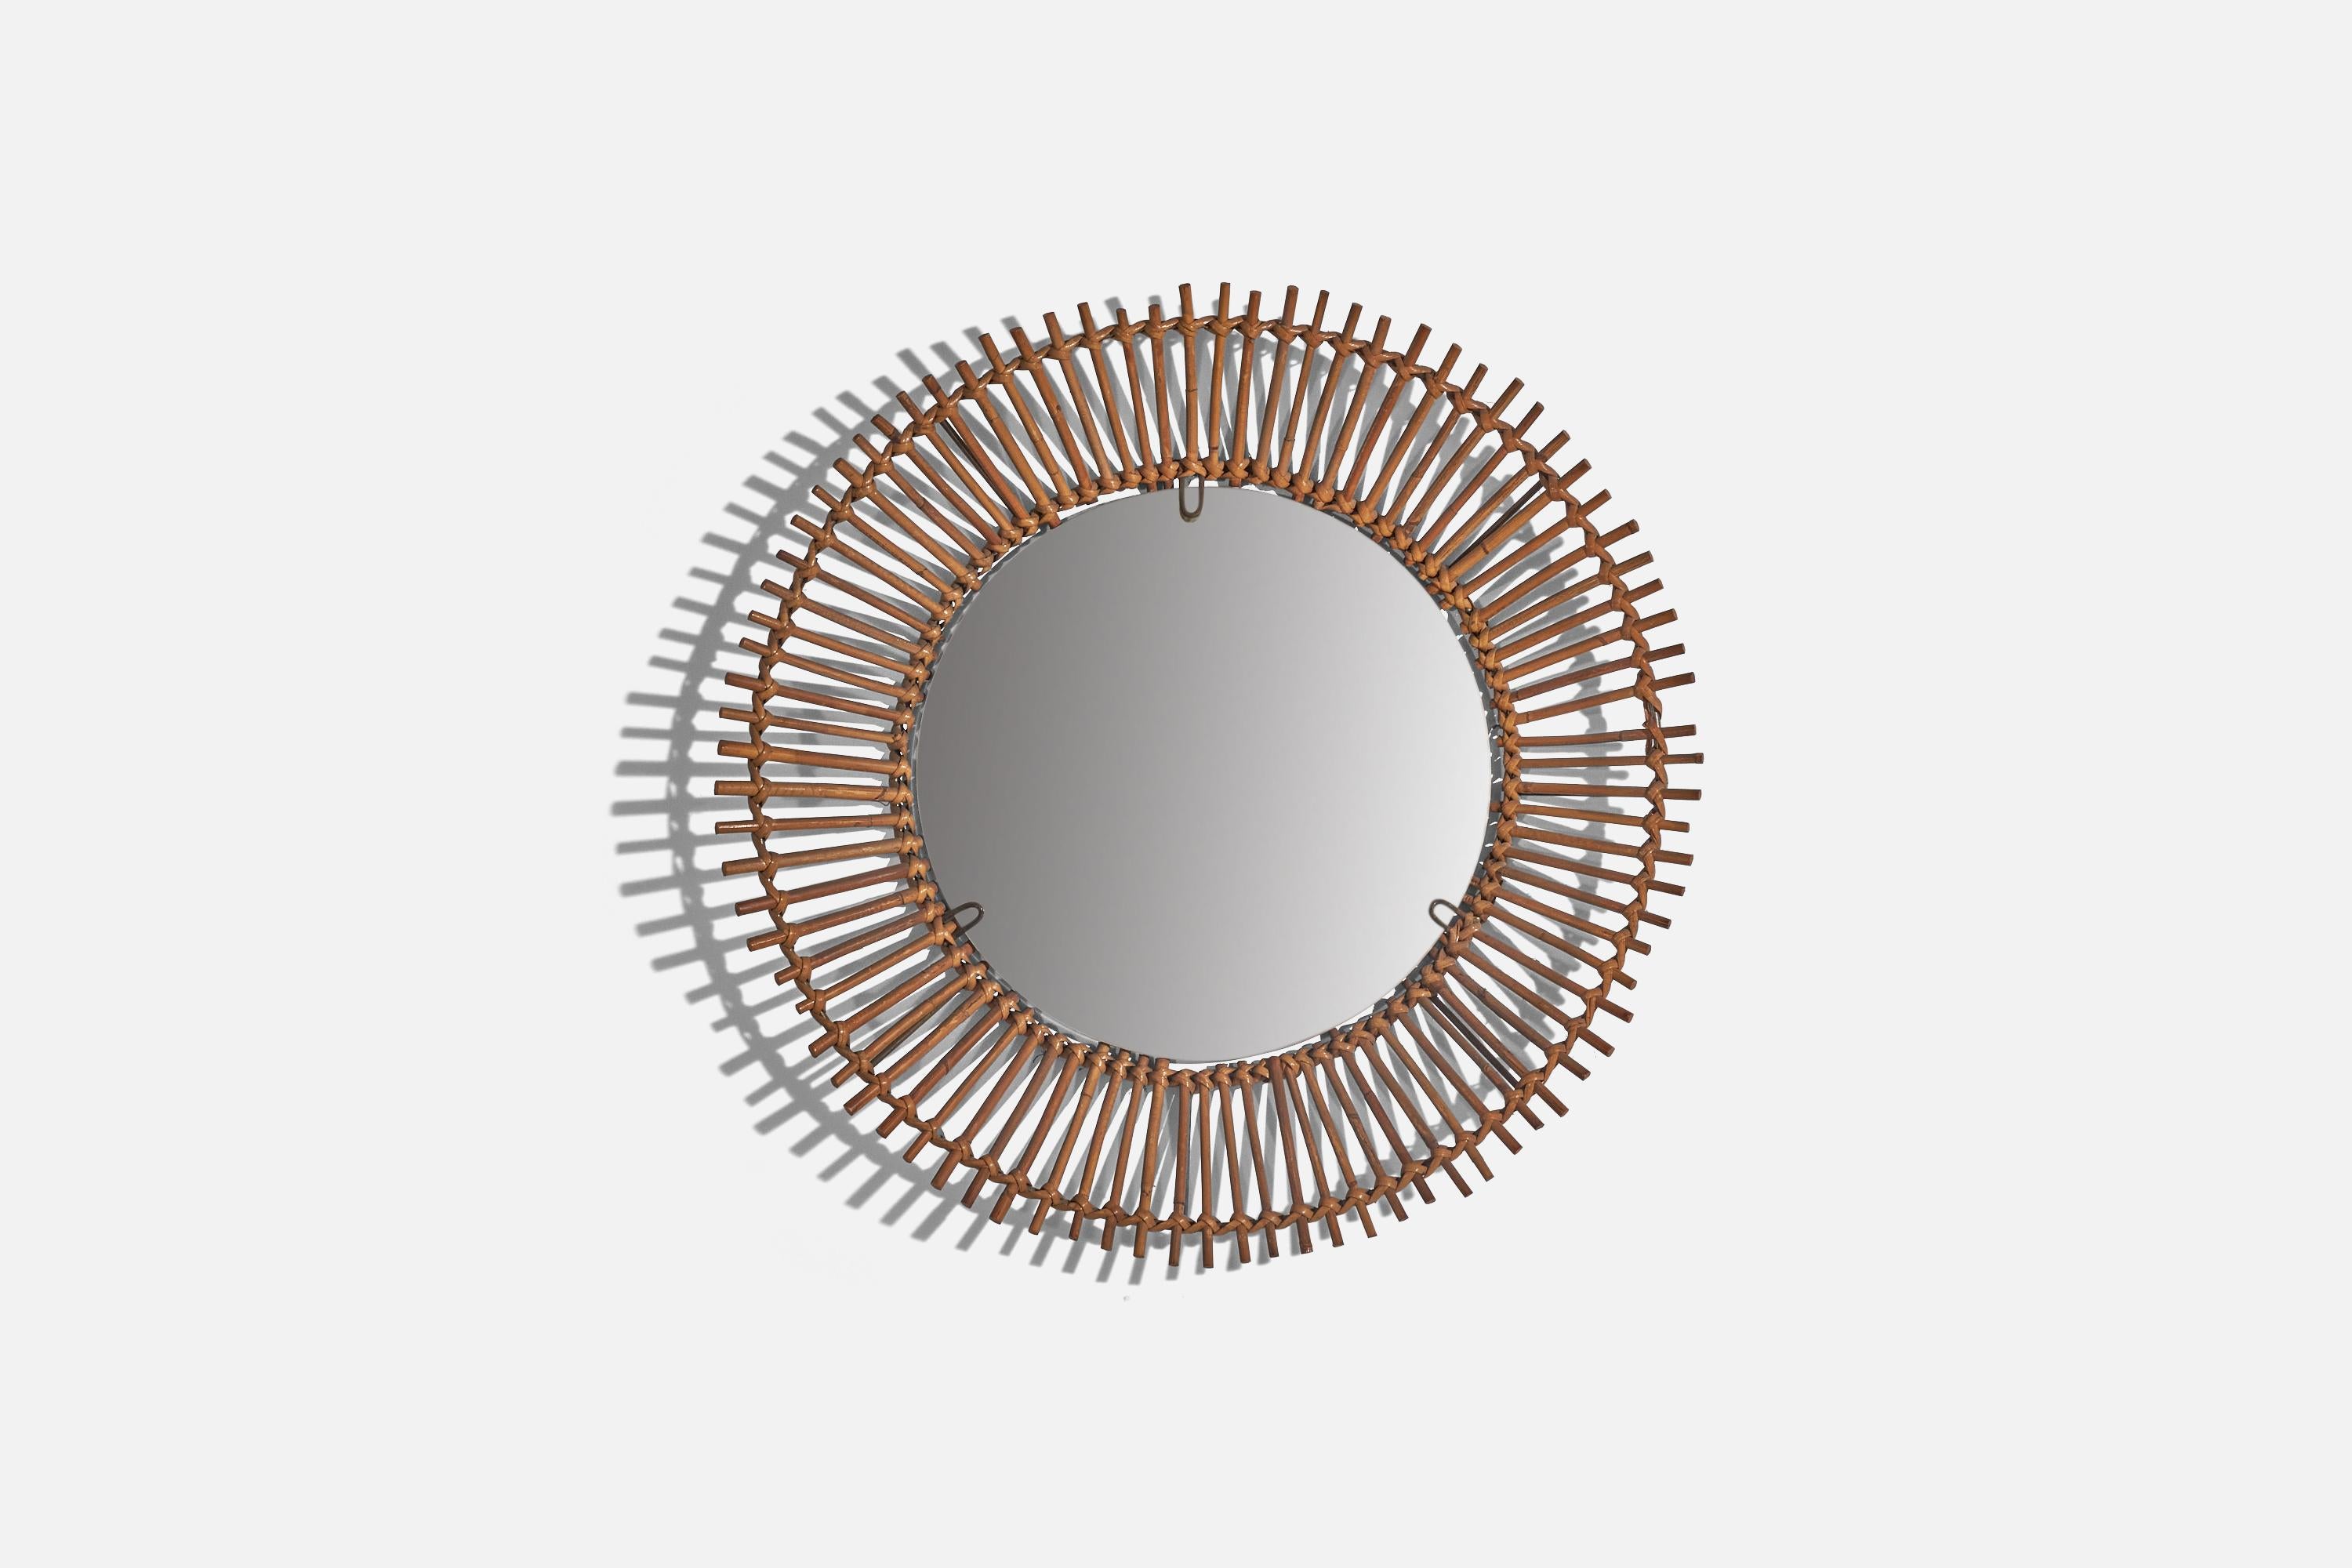 A rattan wall mirror designed and produced by an Italian designer, Italy, c. 1960s.
 